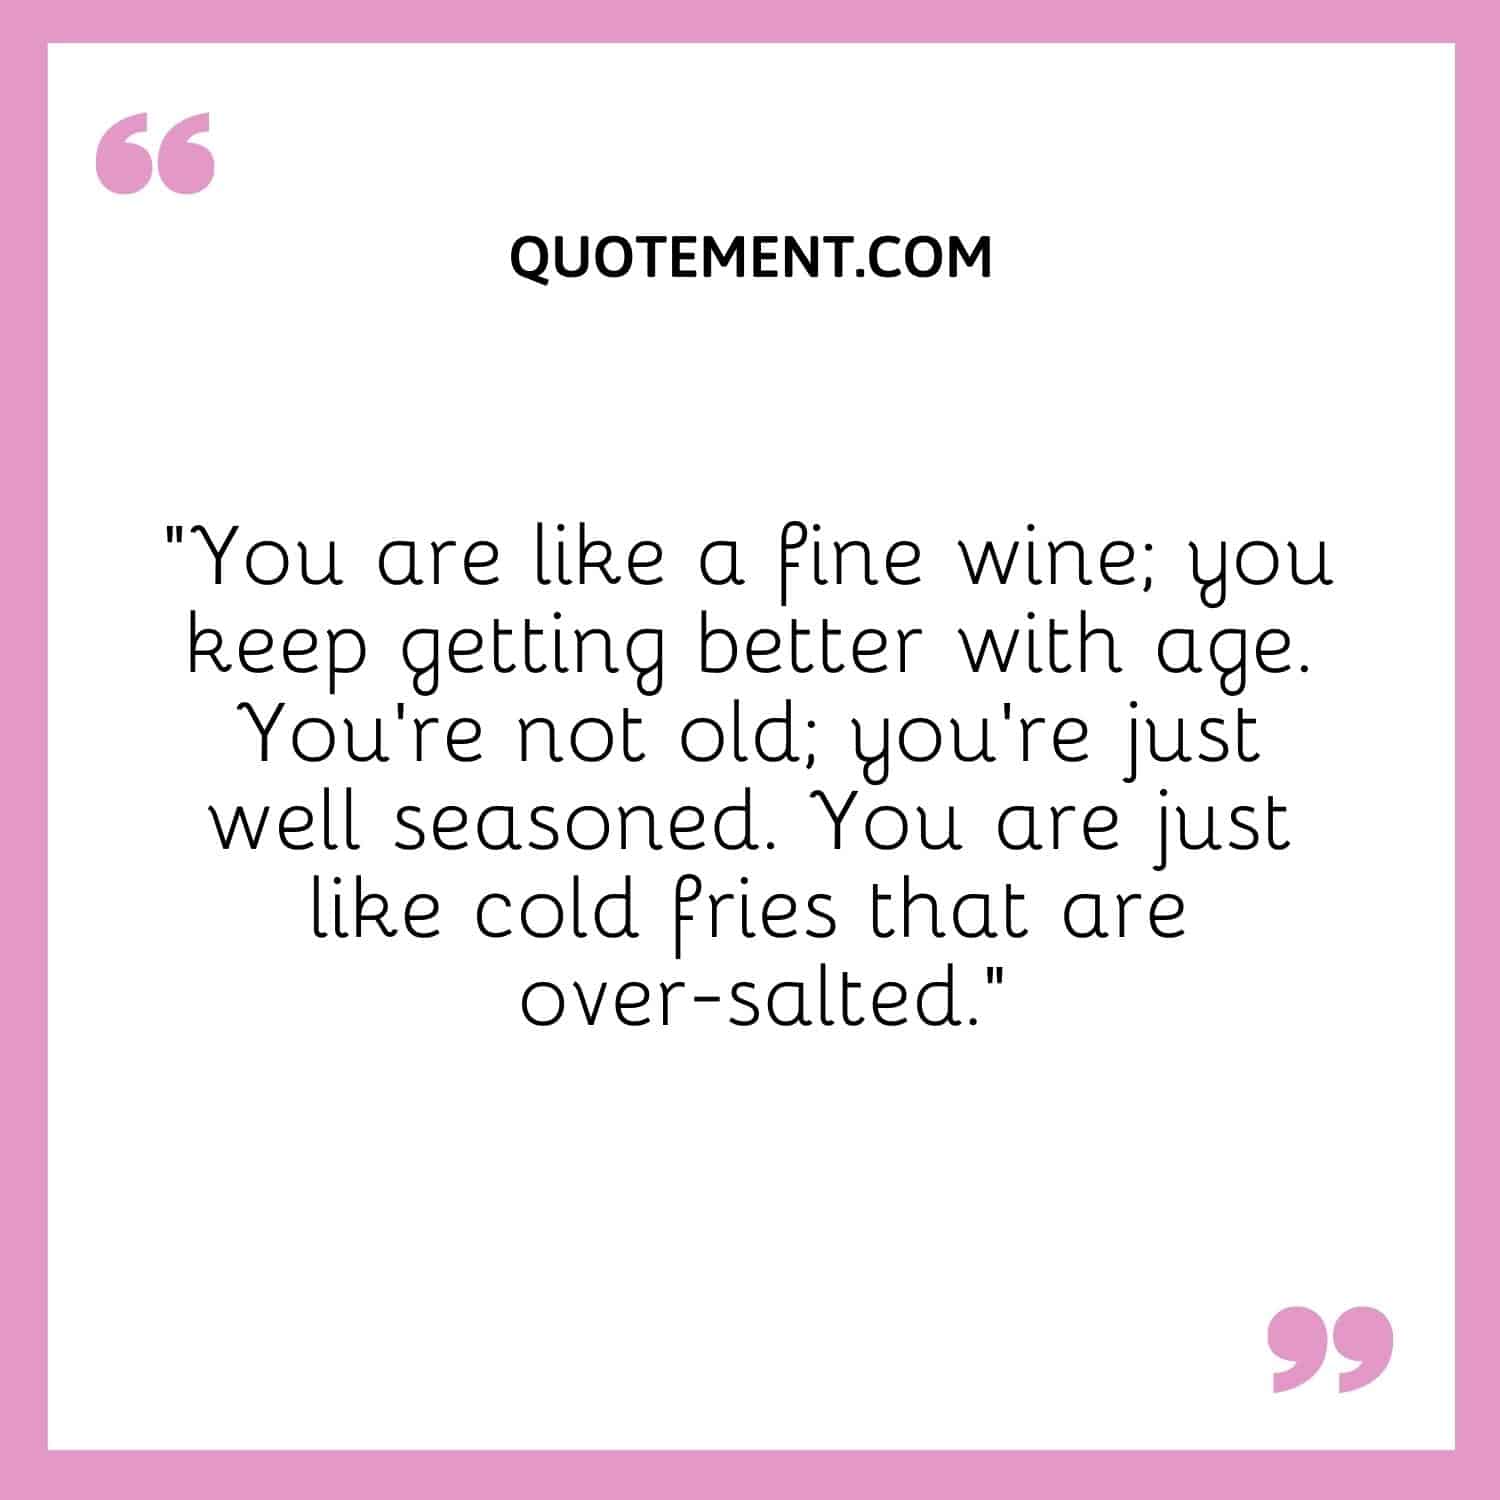 You are like a fine wine; you keep getting better with age.